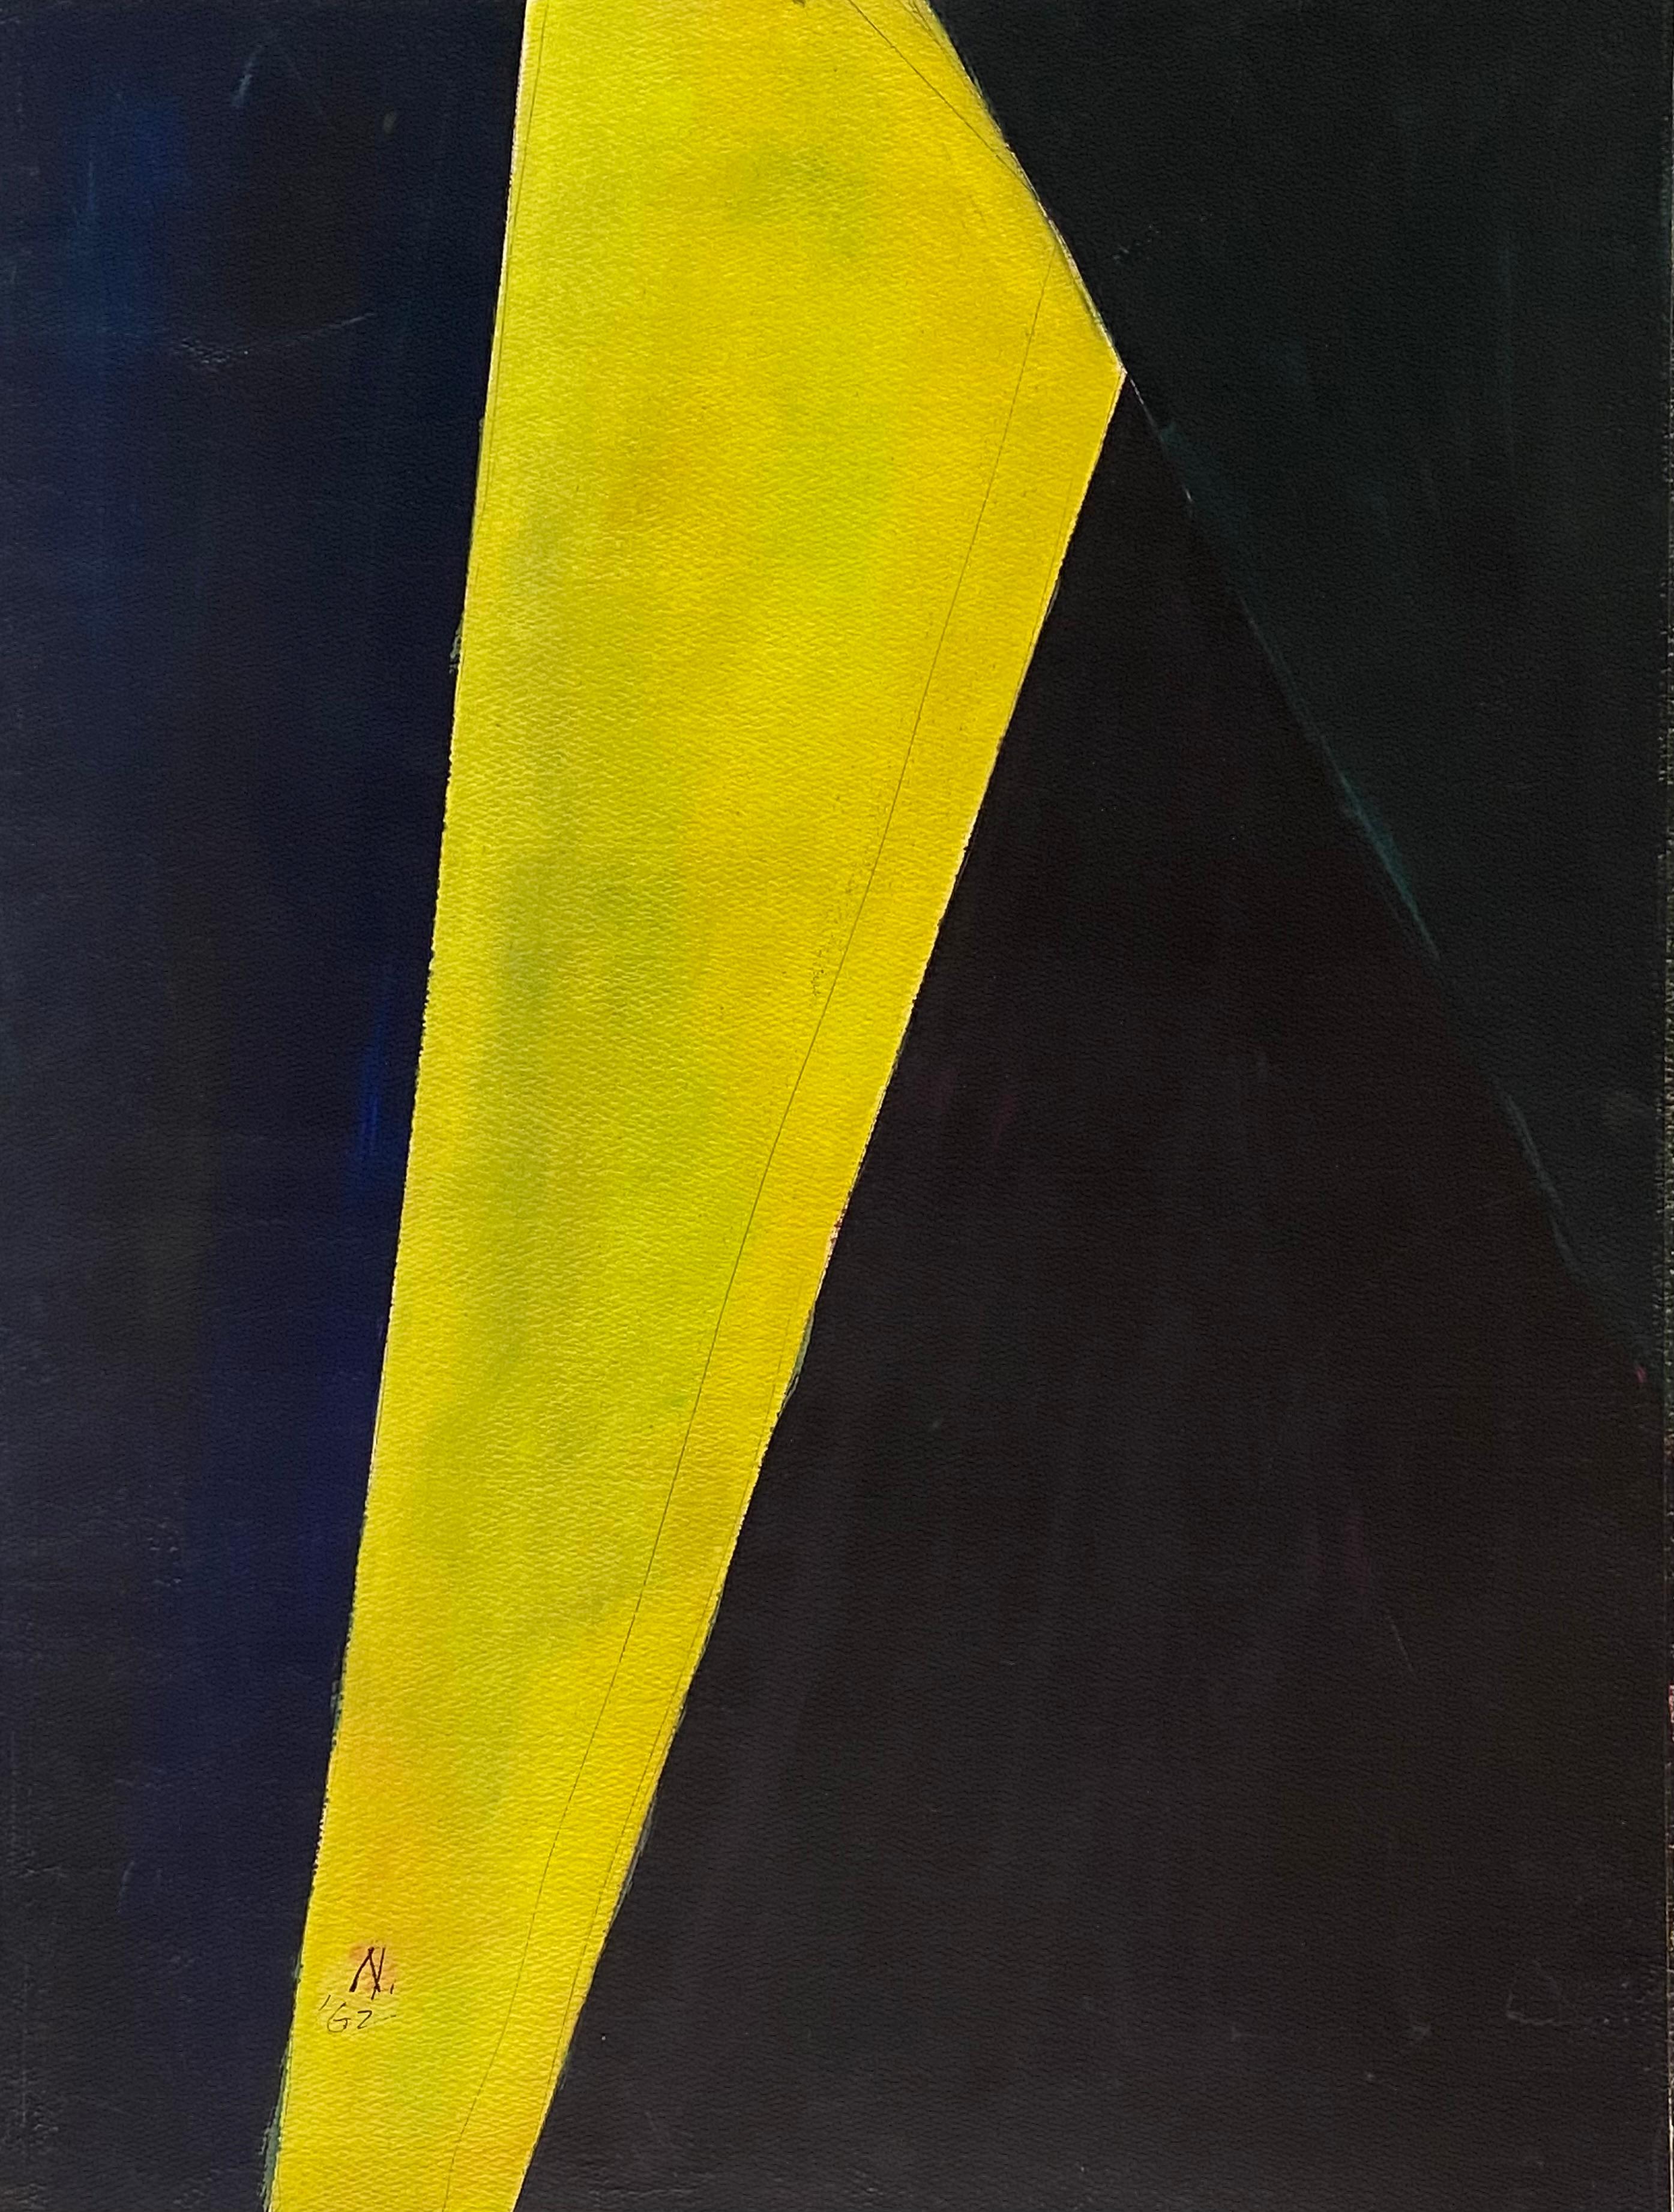 “Abstract in Black and Yellow” - Art by Lloyd Raymond Ney